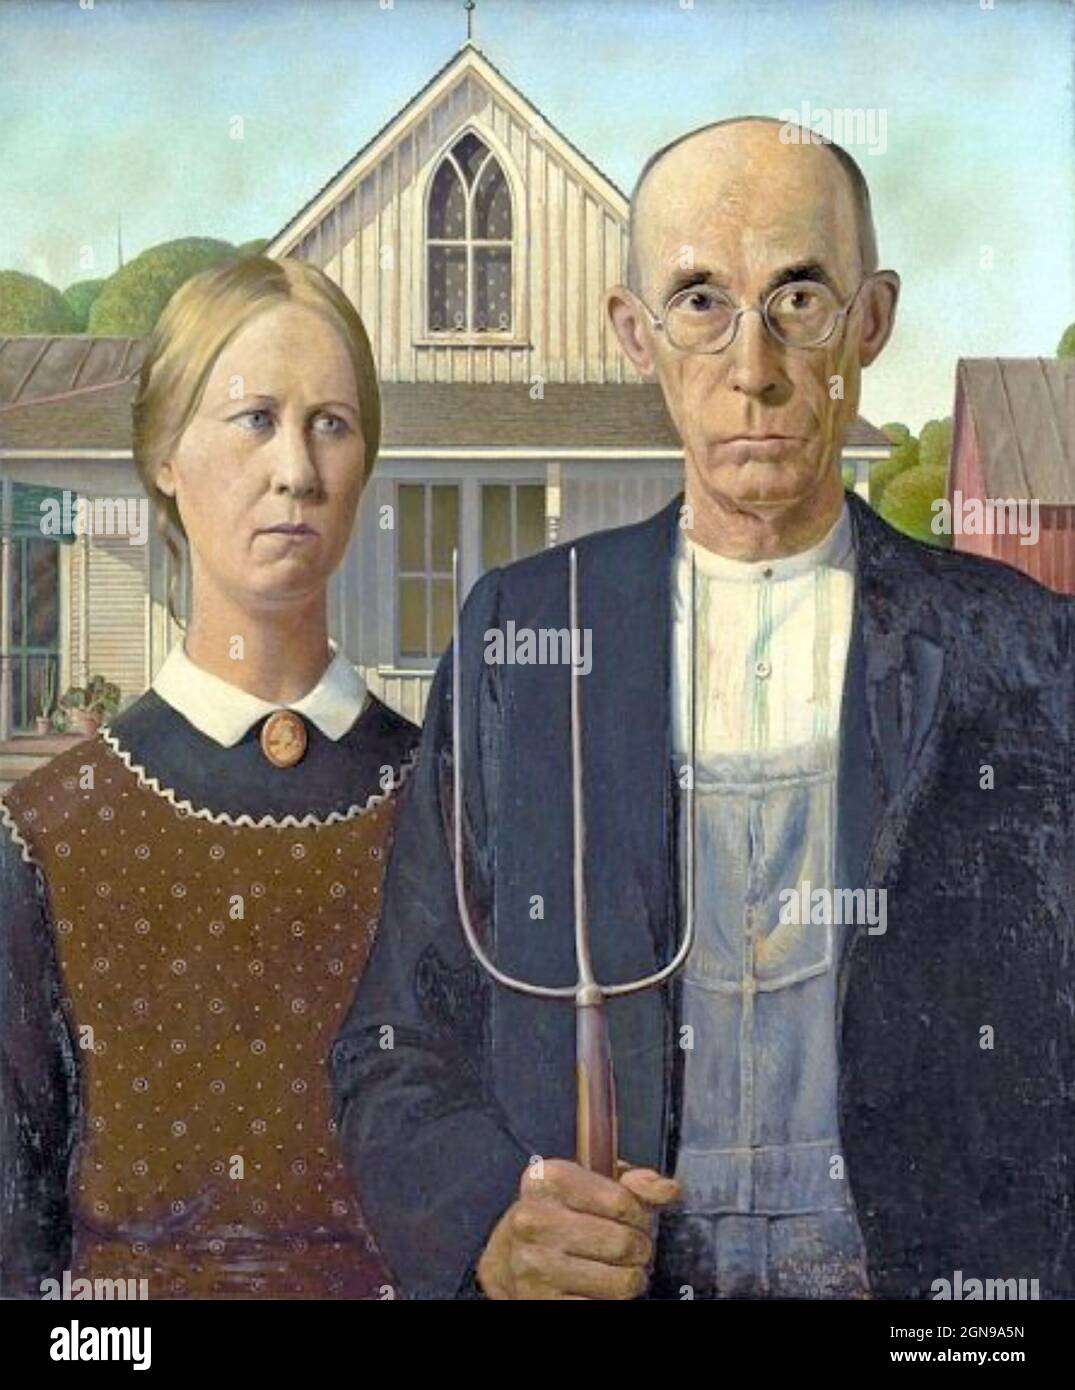 AMERICAN GOTHIC A farmer stands next to his daughter in the 10